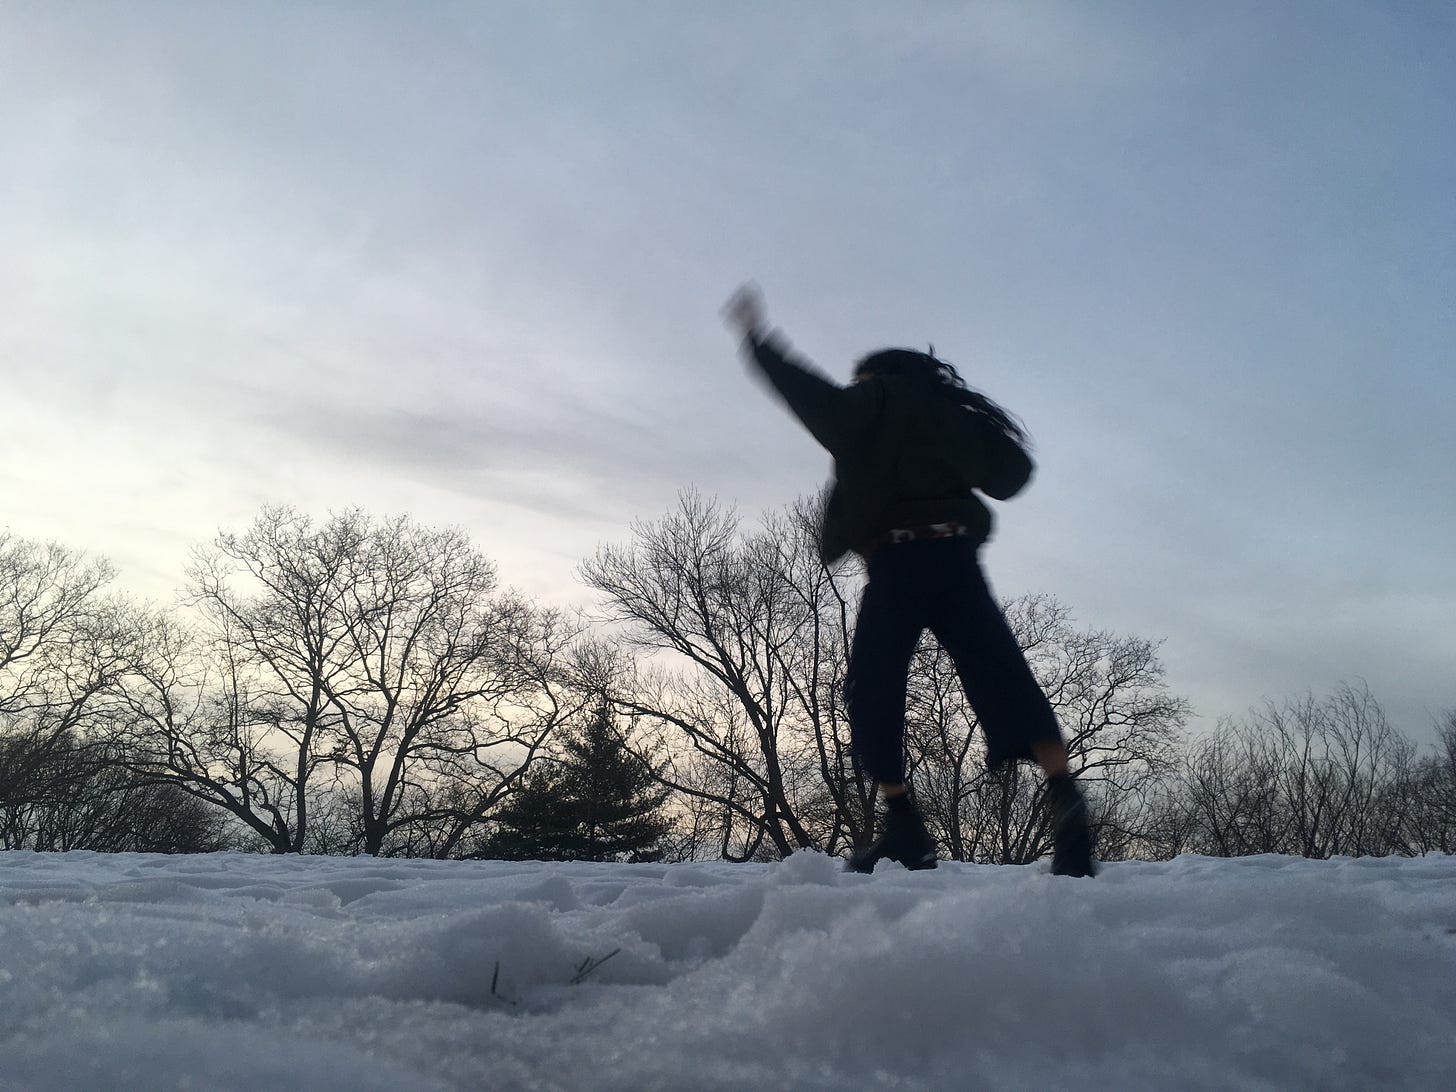 photo by me:  me keeping my weight above the ground covered in snow, left leg slightly bent, left arm raised, with bare trees in the background